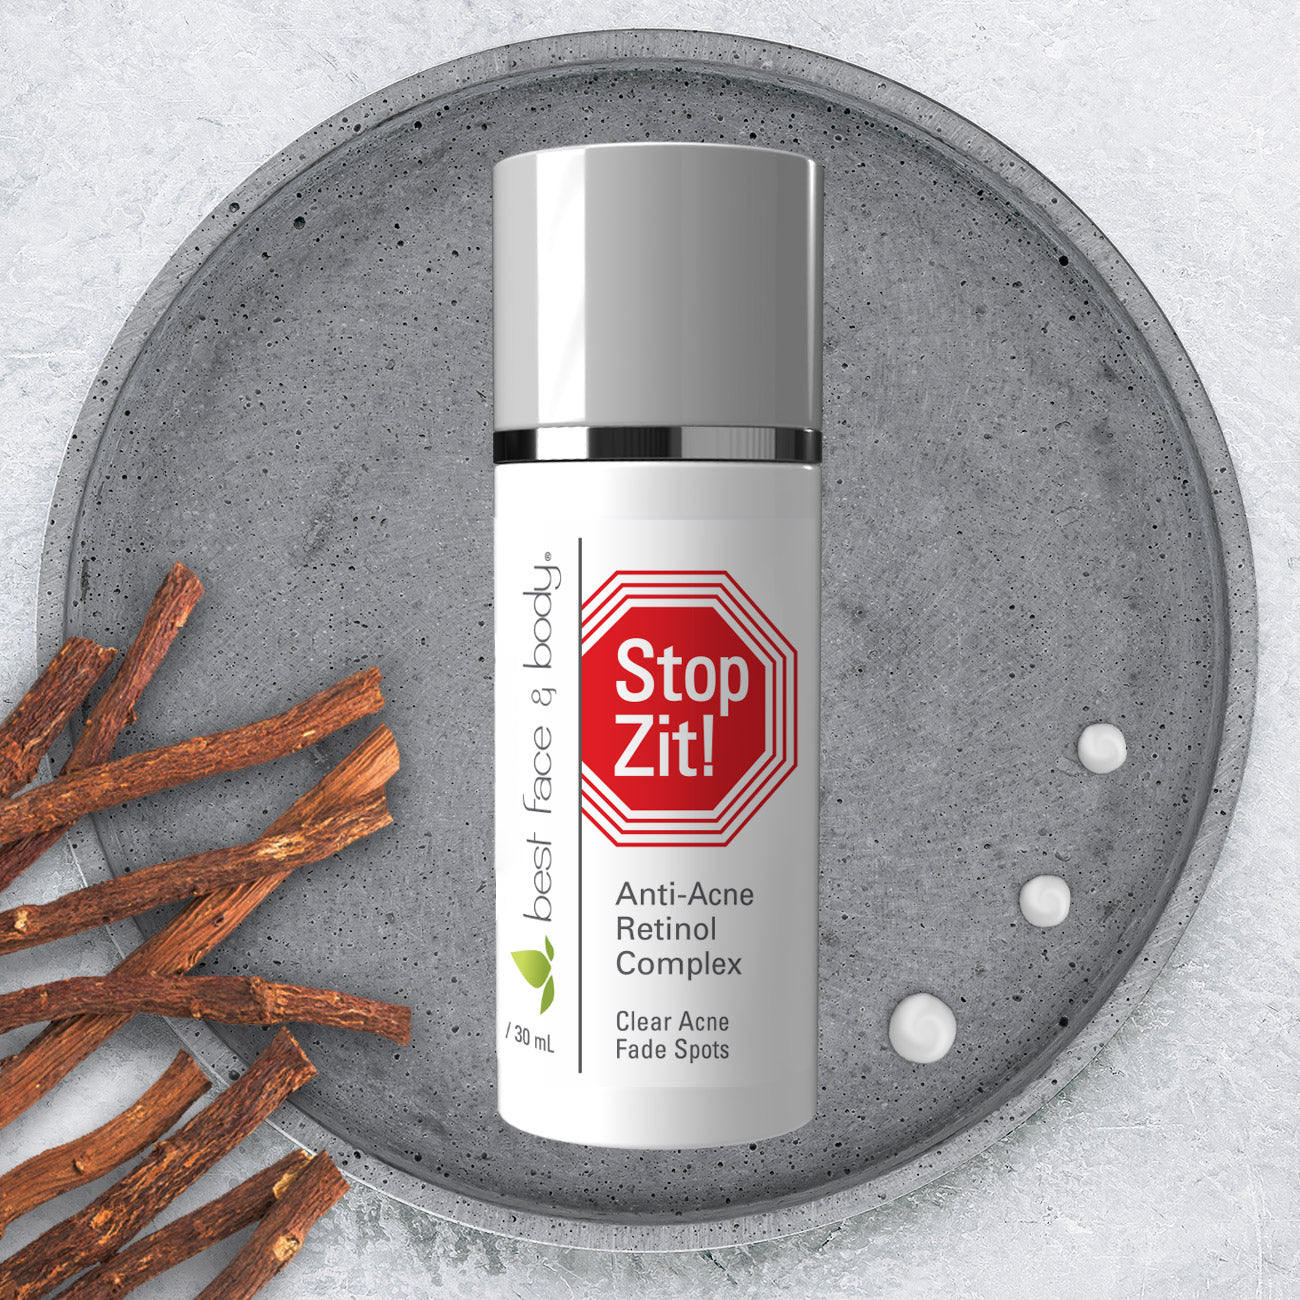 Stop Zit Anti-Acne Retinol Complex pictured on shallow stone dish with willow bark and serum drops on side.